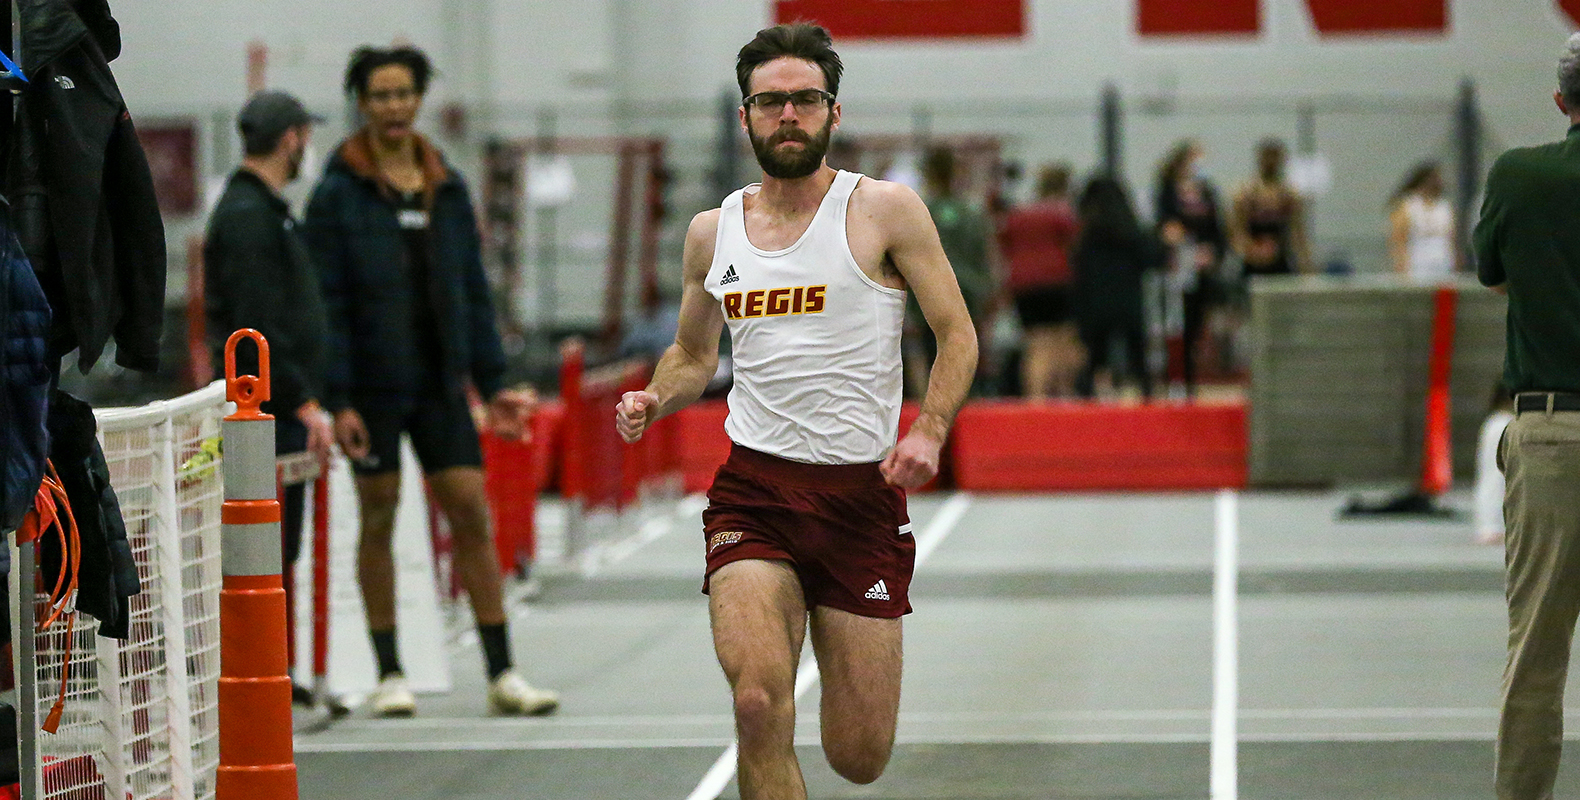 School Record Highlights Outdoor Opener for Men’s Track and Field